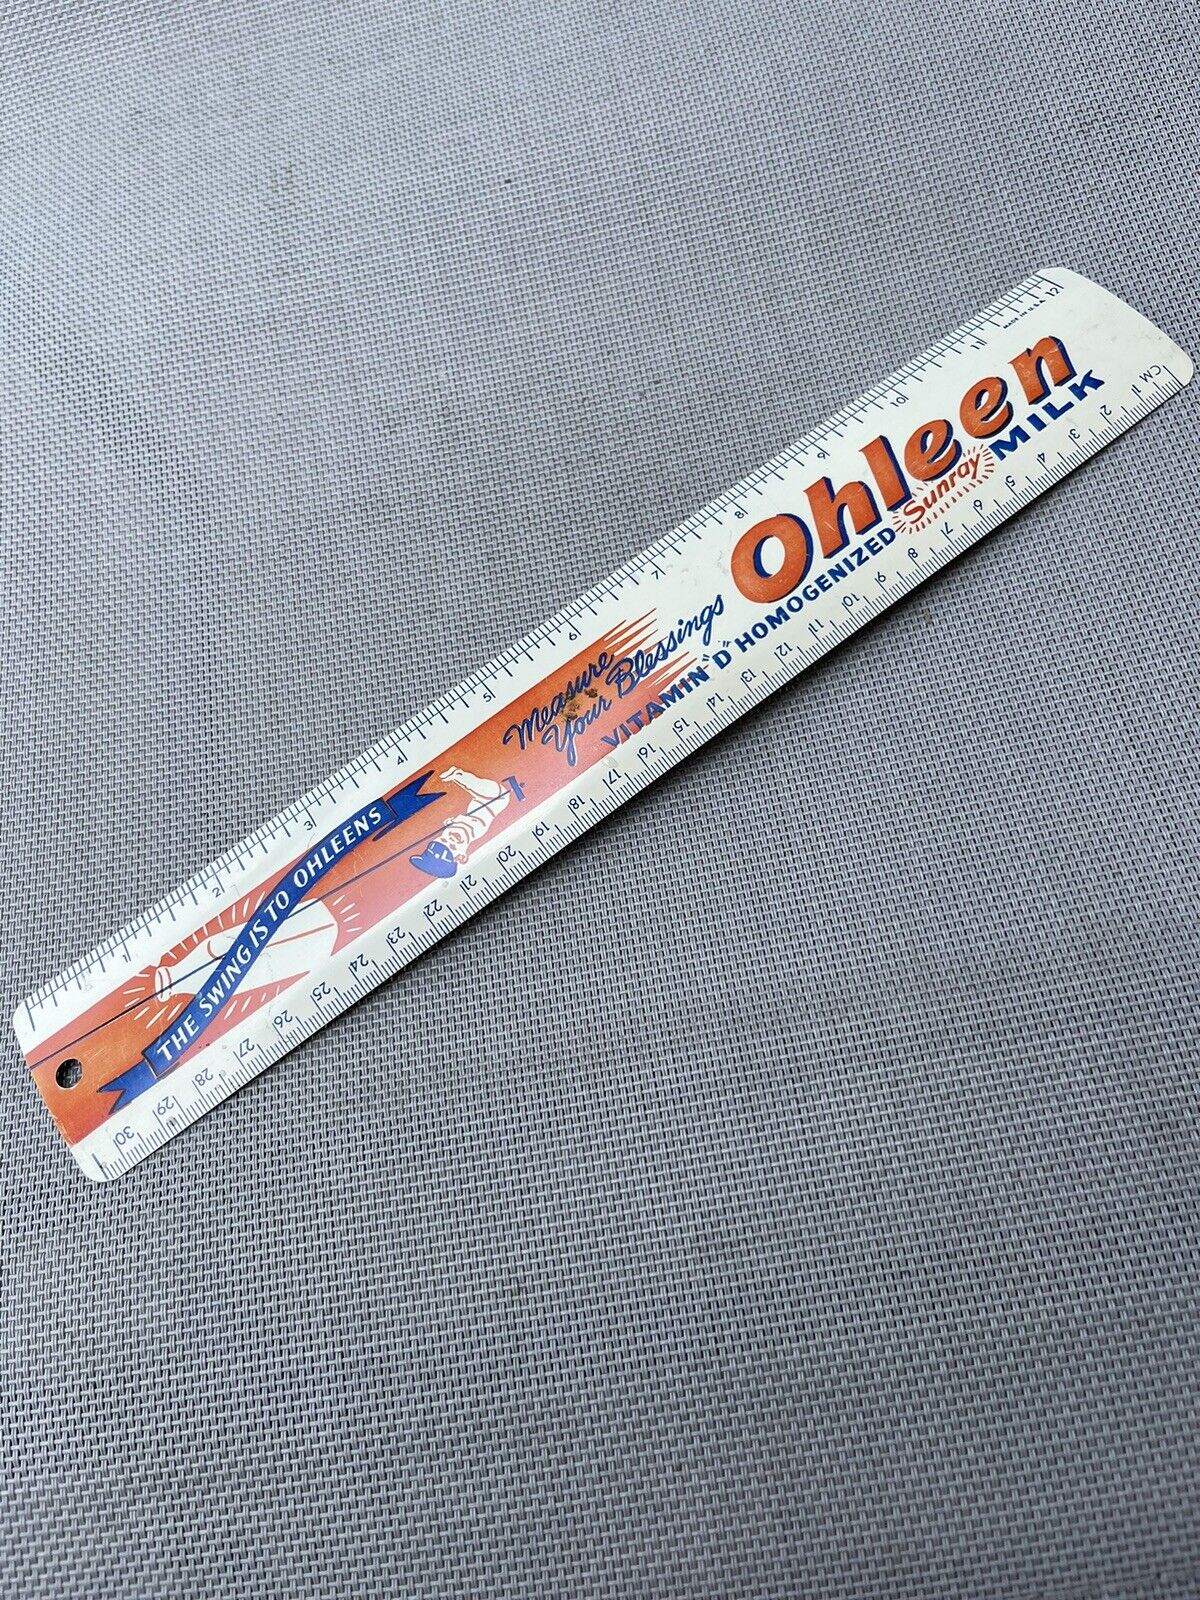 Vintage 1950s Ohleen Dairy Products Sunray Milk metal advertising ruler  Sign